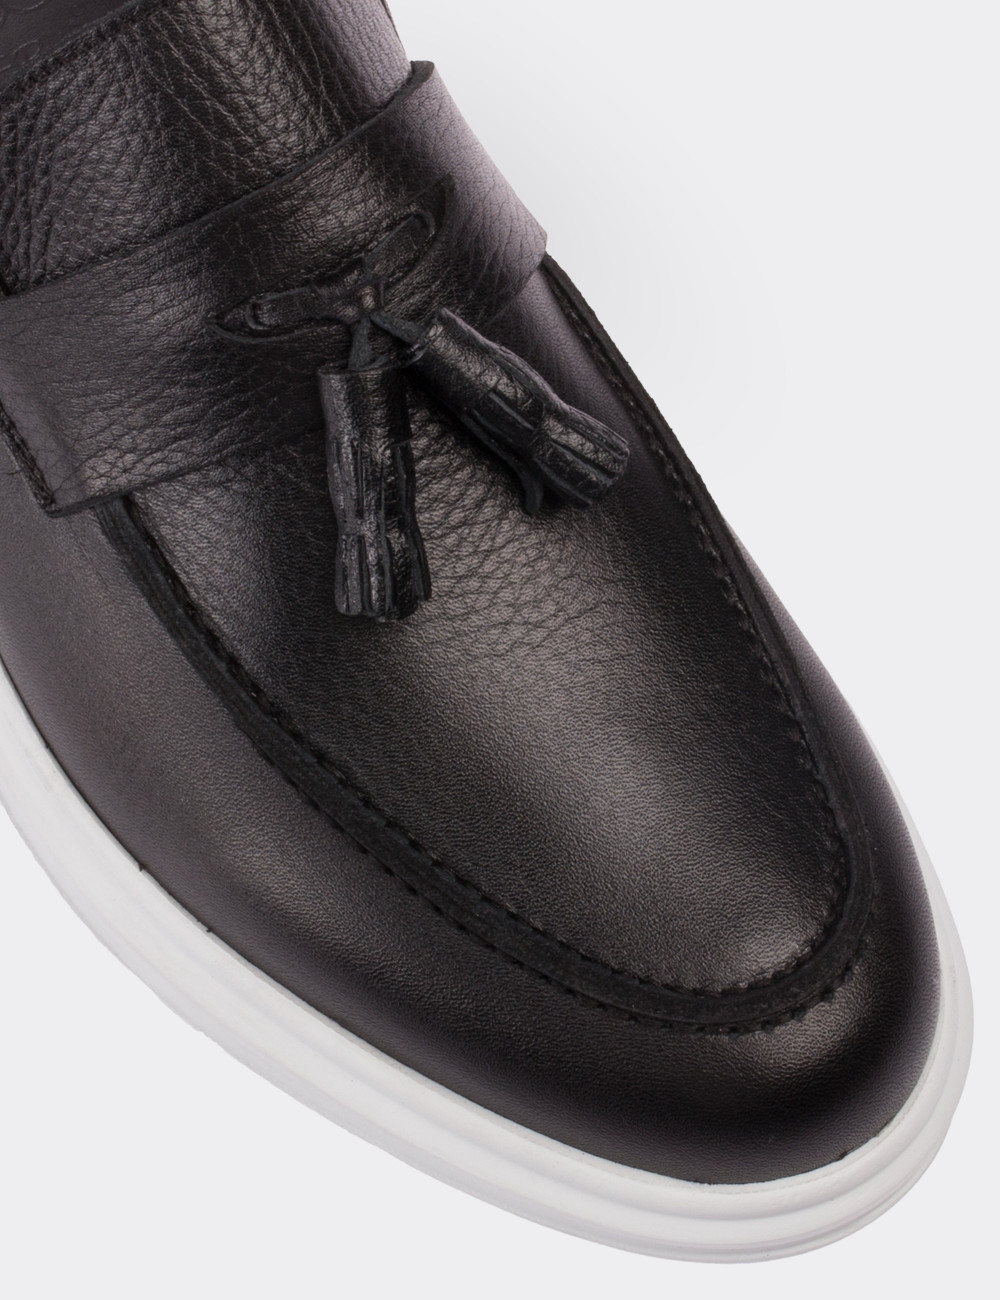 Black  Leather Loafers - 01587MSYHP02